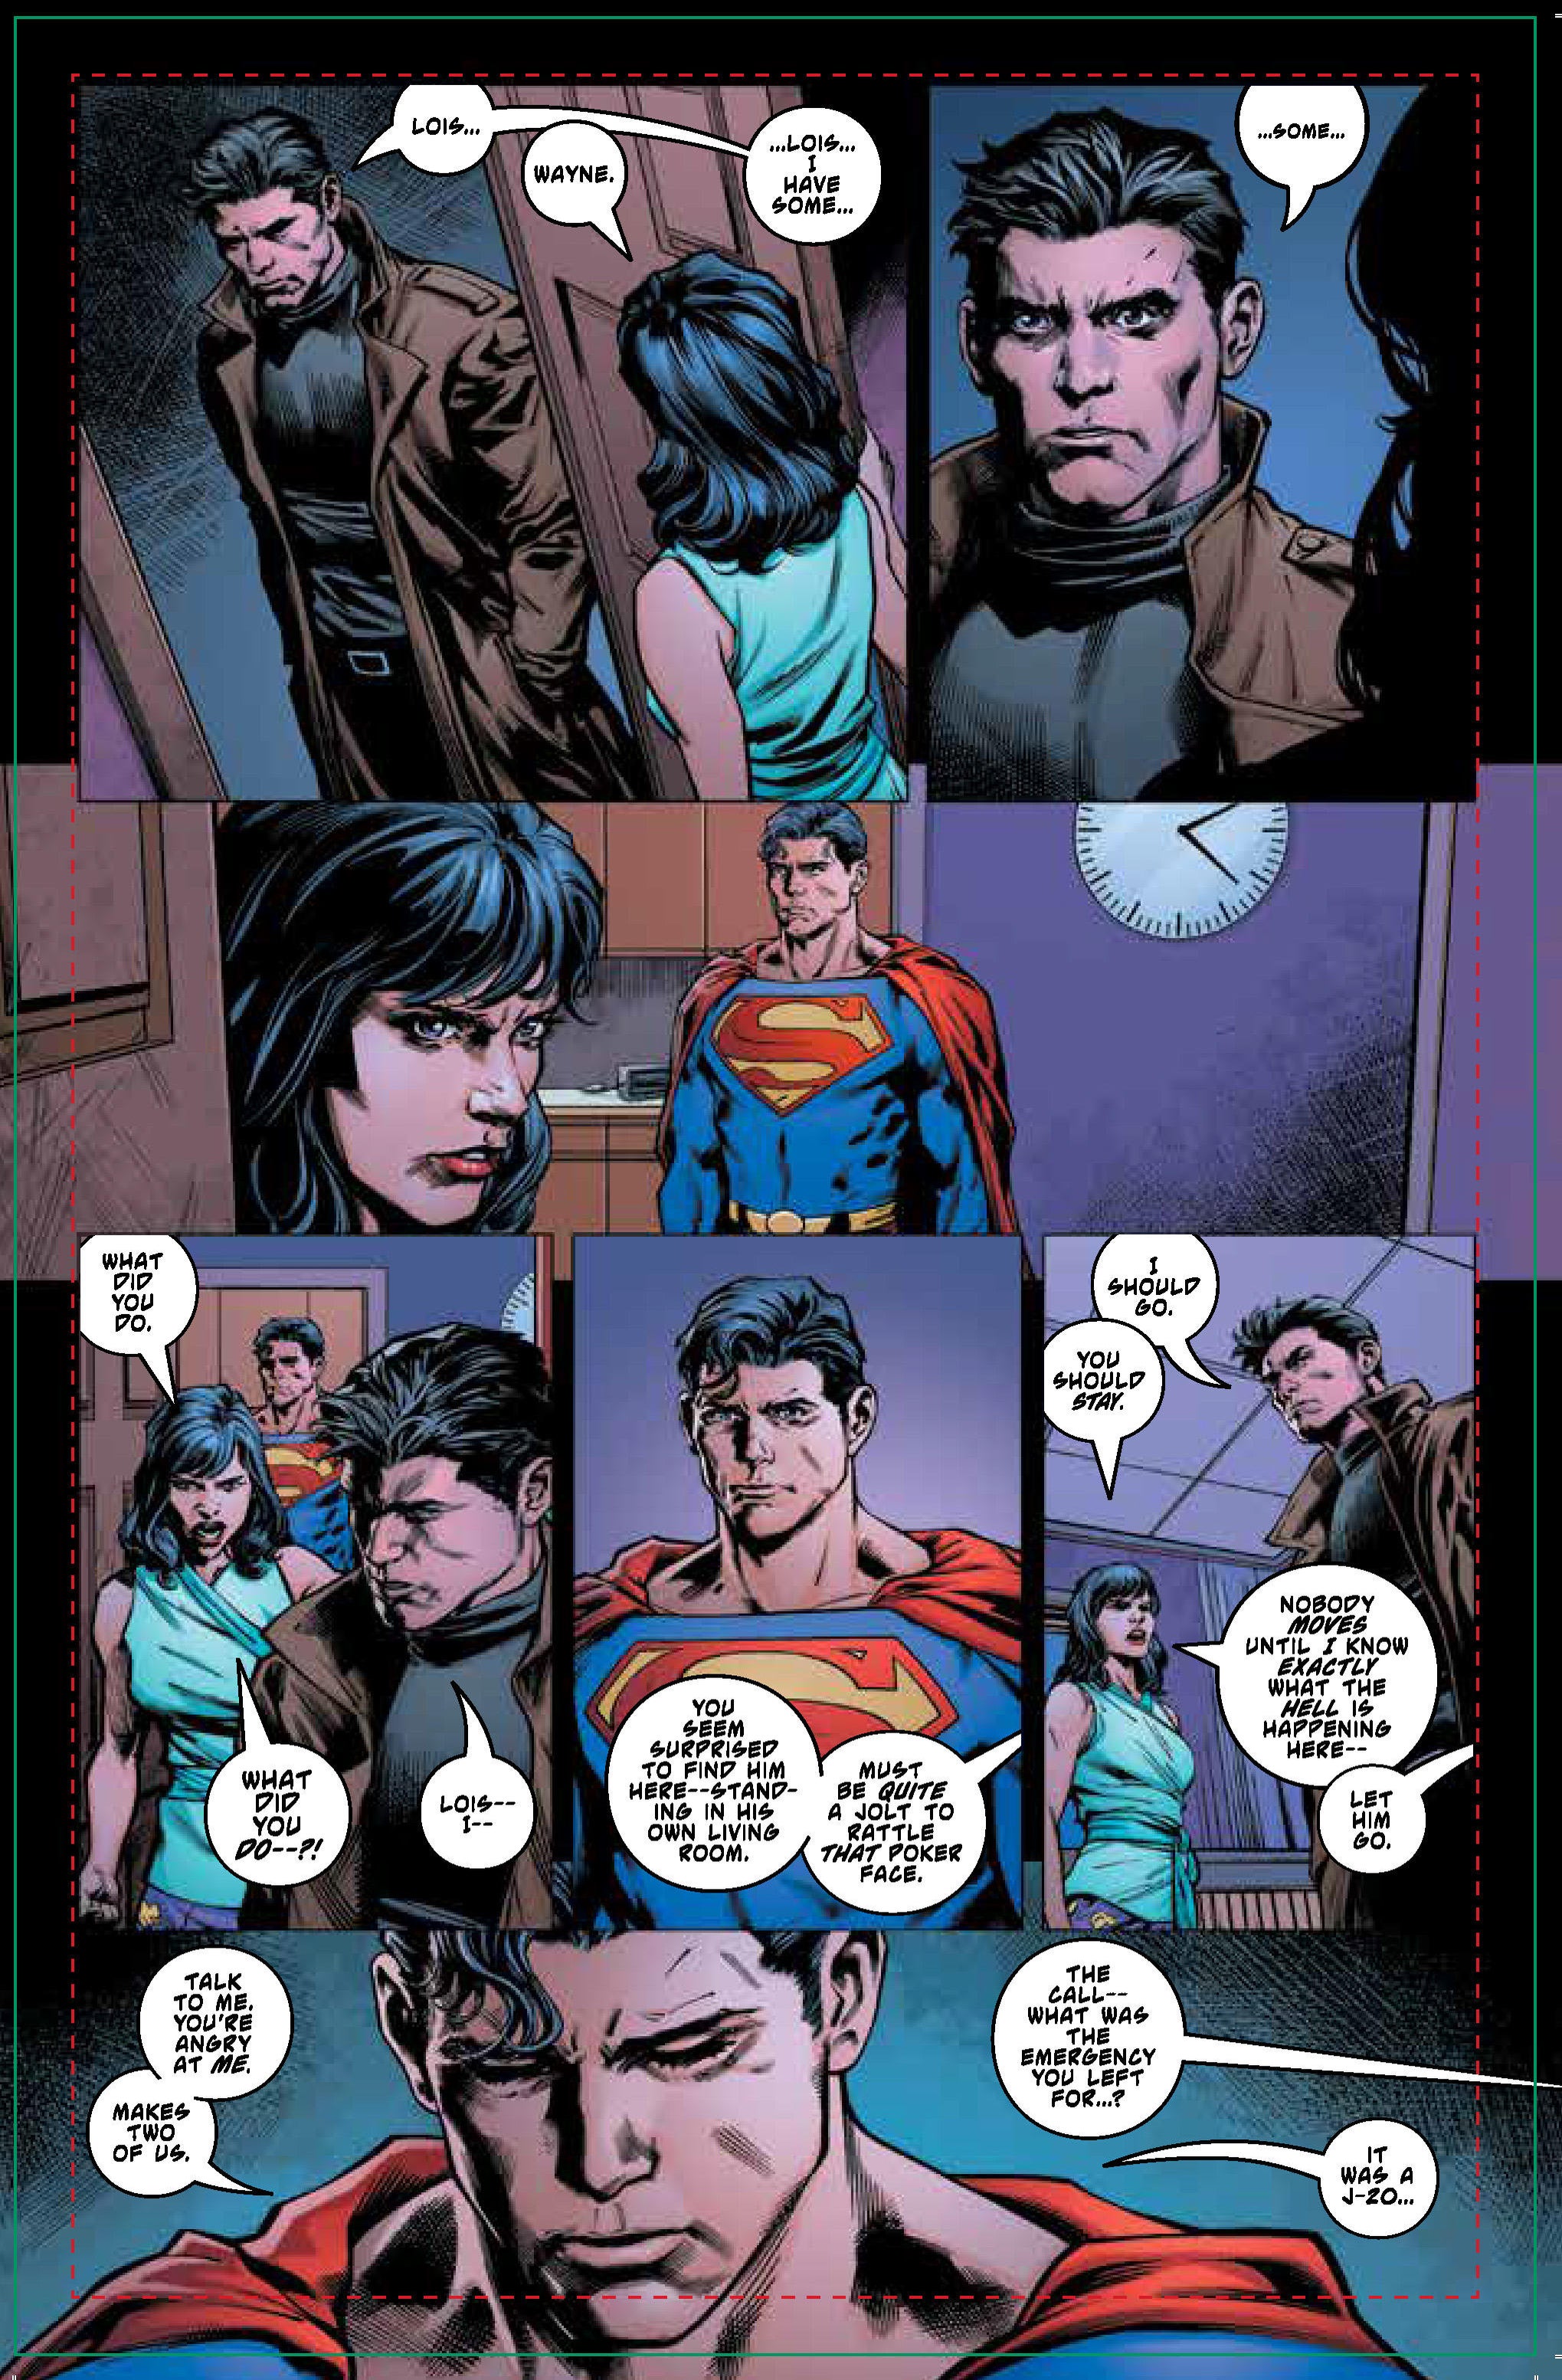 superman-lost-01-preview-4.jpg